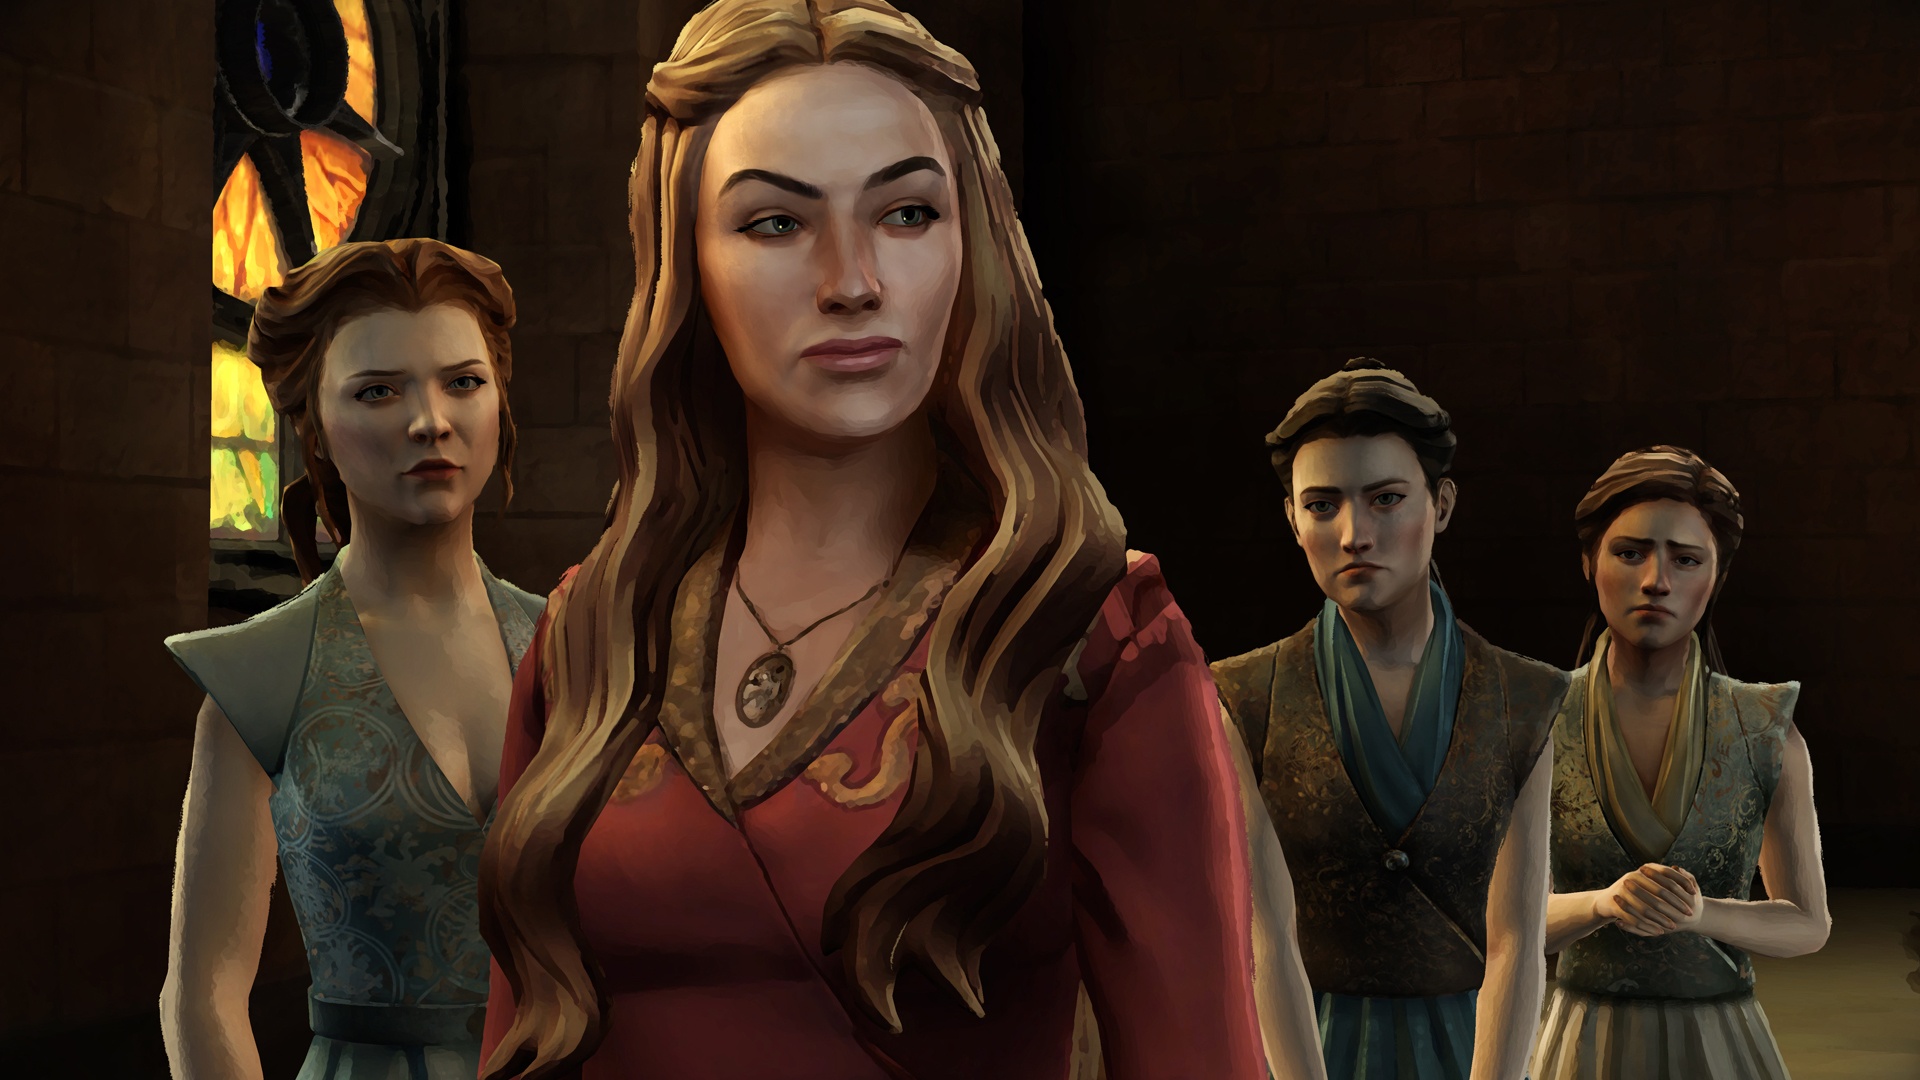 Images of Game Of Thrones - A Telltale Games Series | 1920x1080